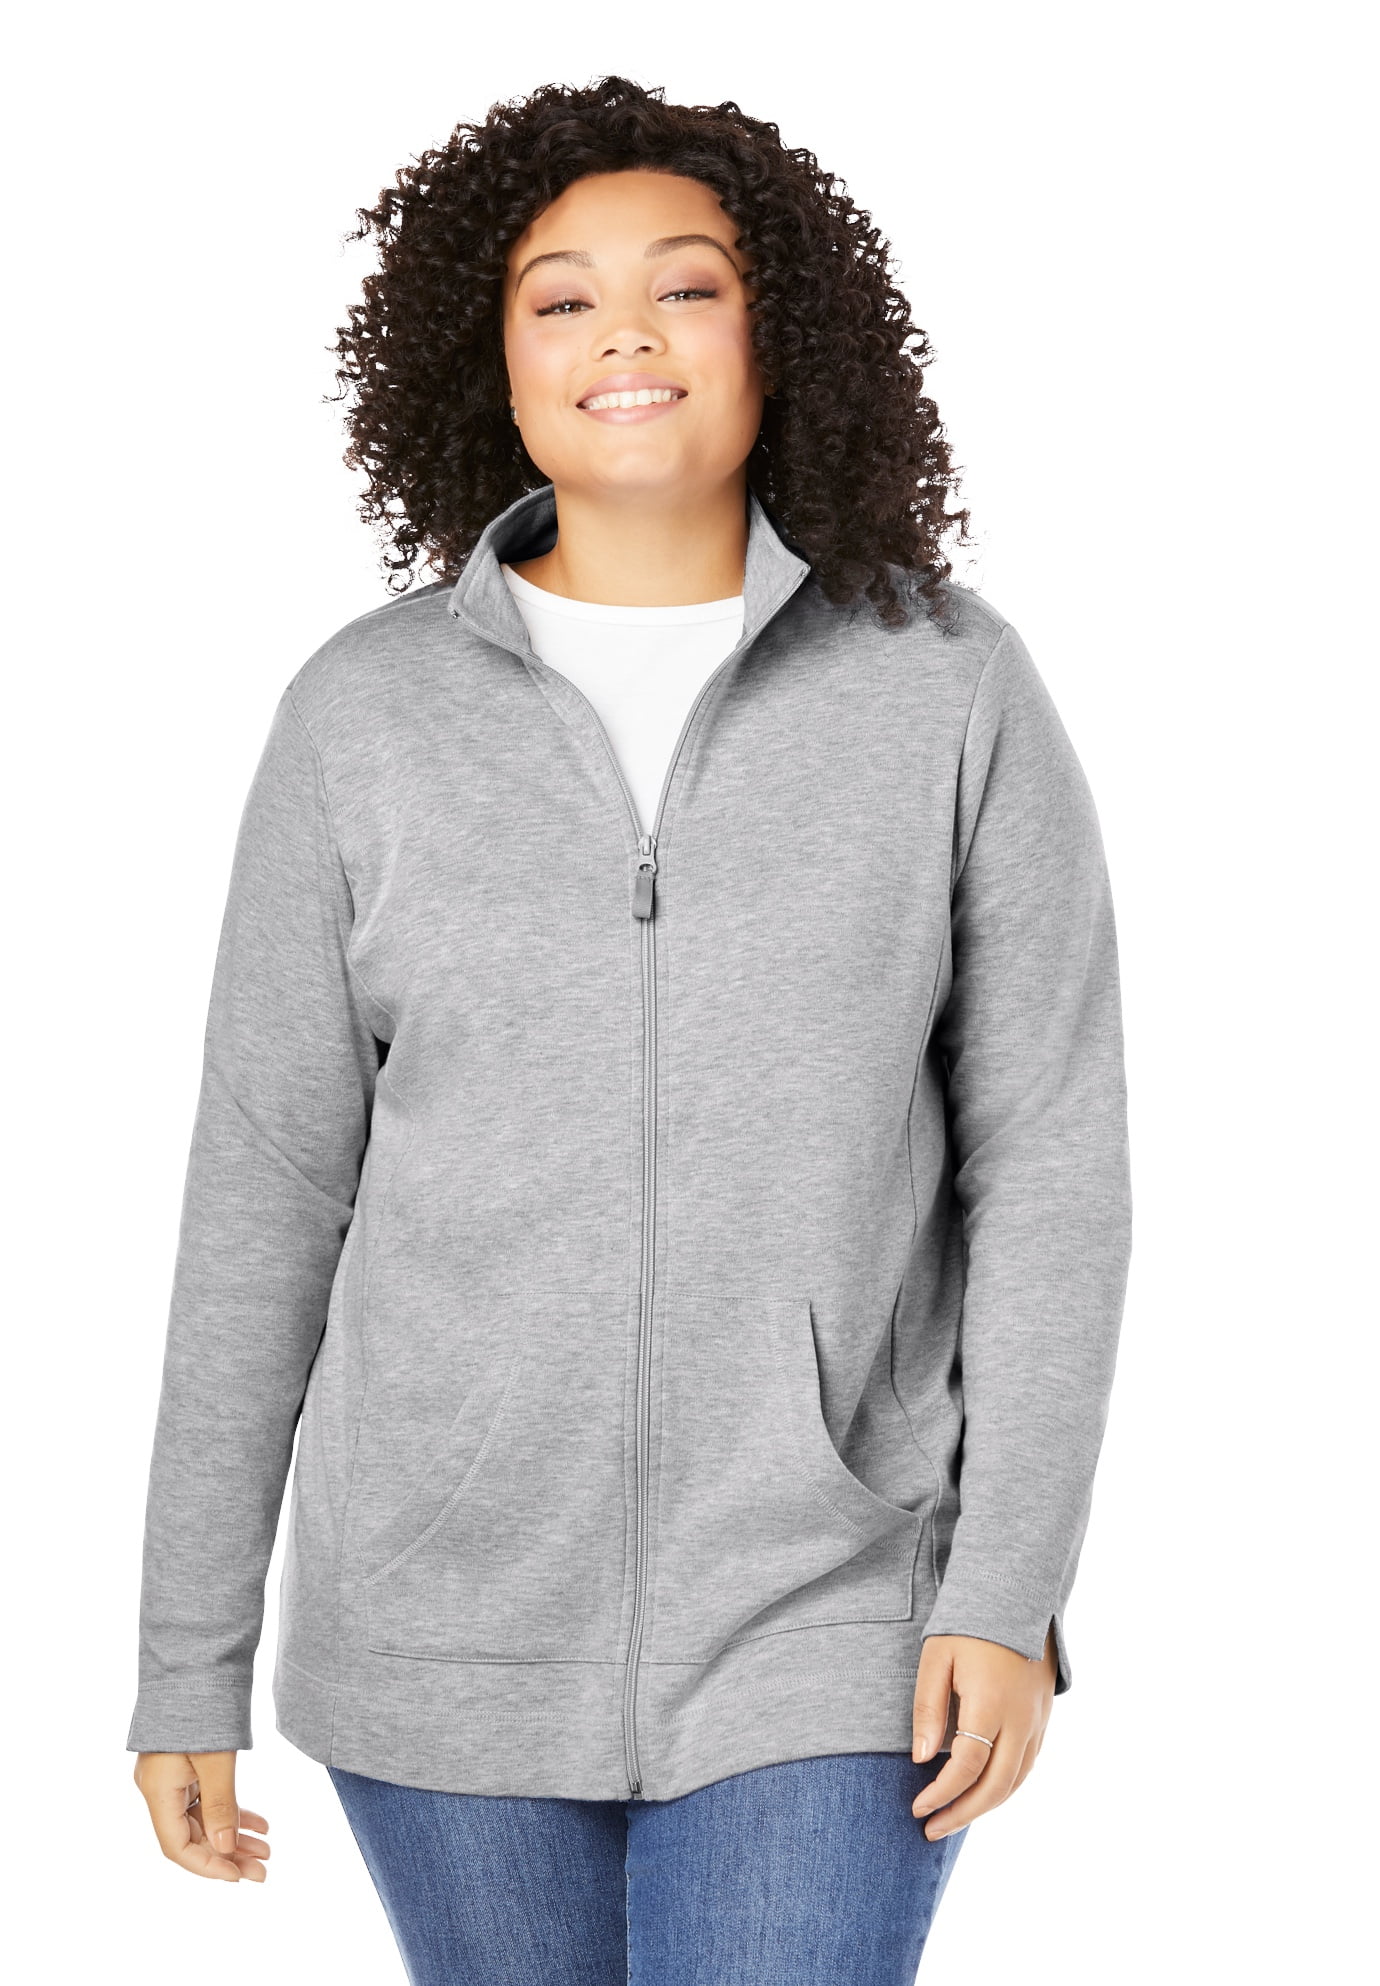 Download Woman Within - Woman Within Women's Plus Size Long-Sleeve ...